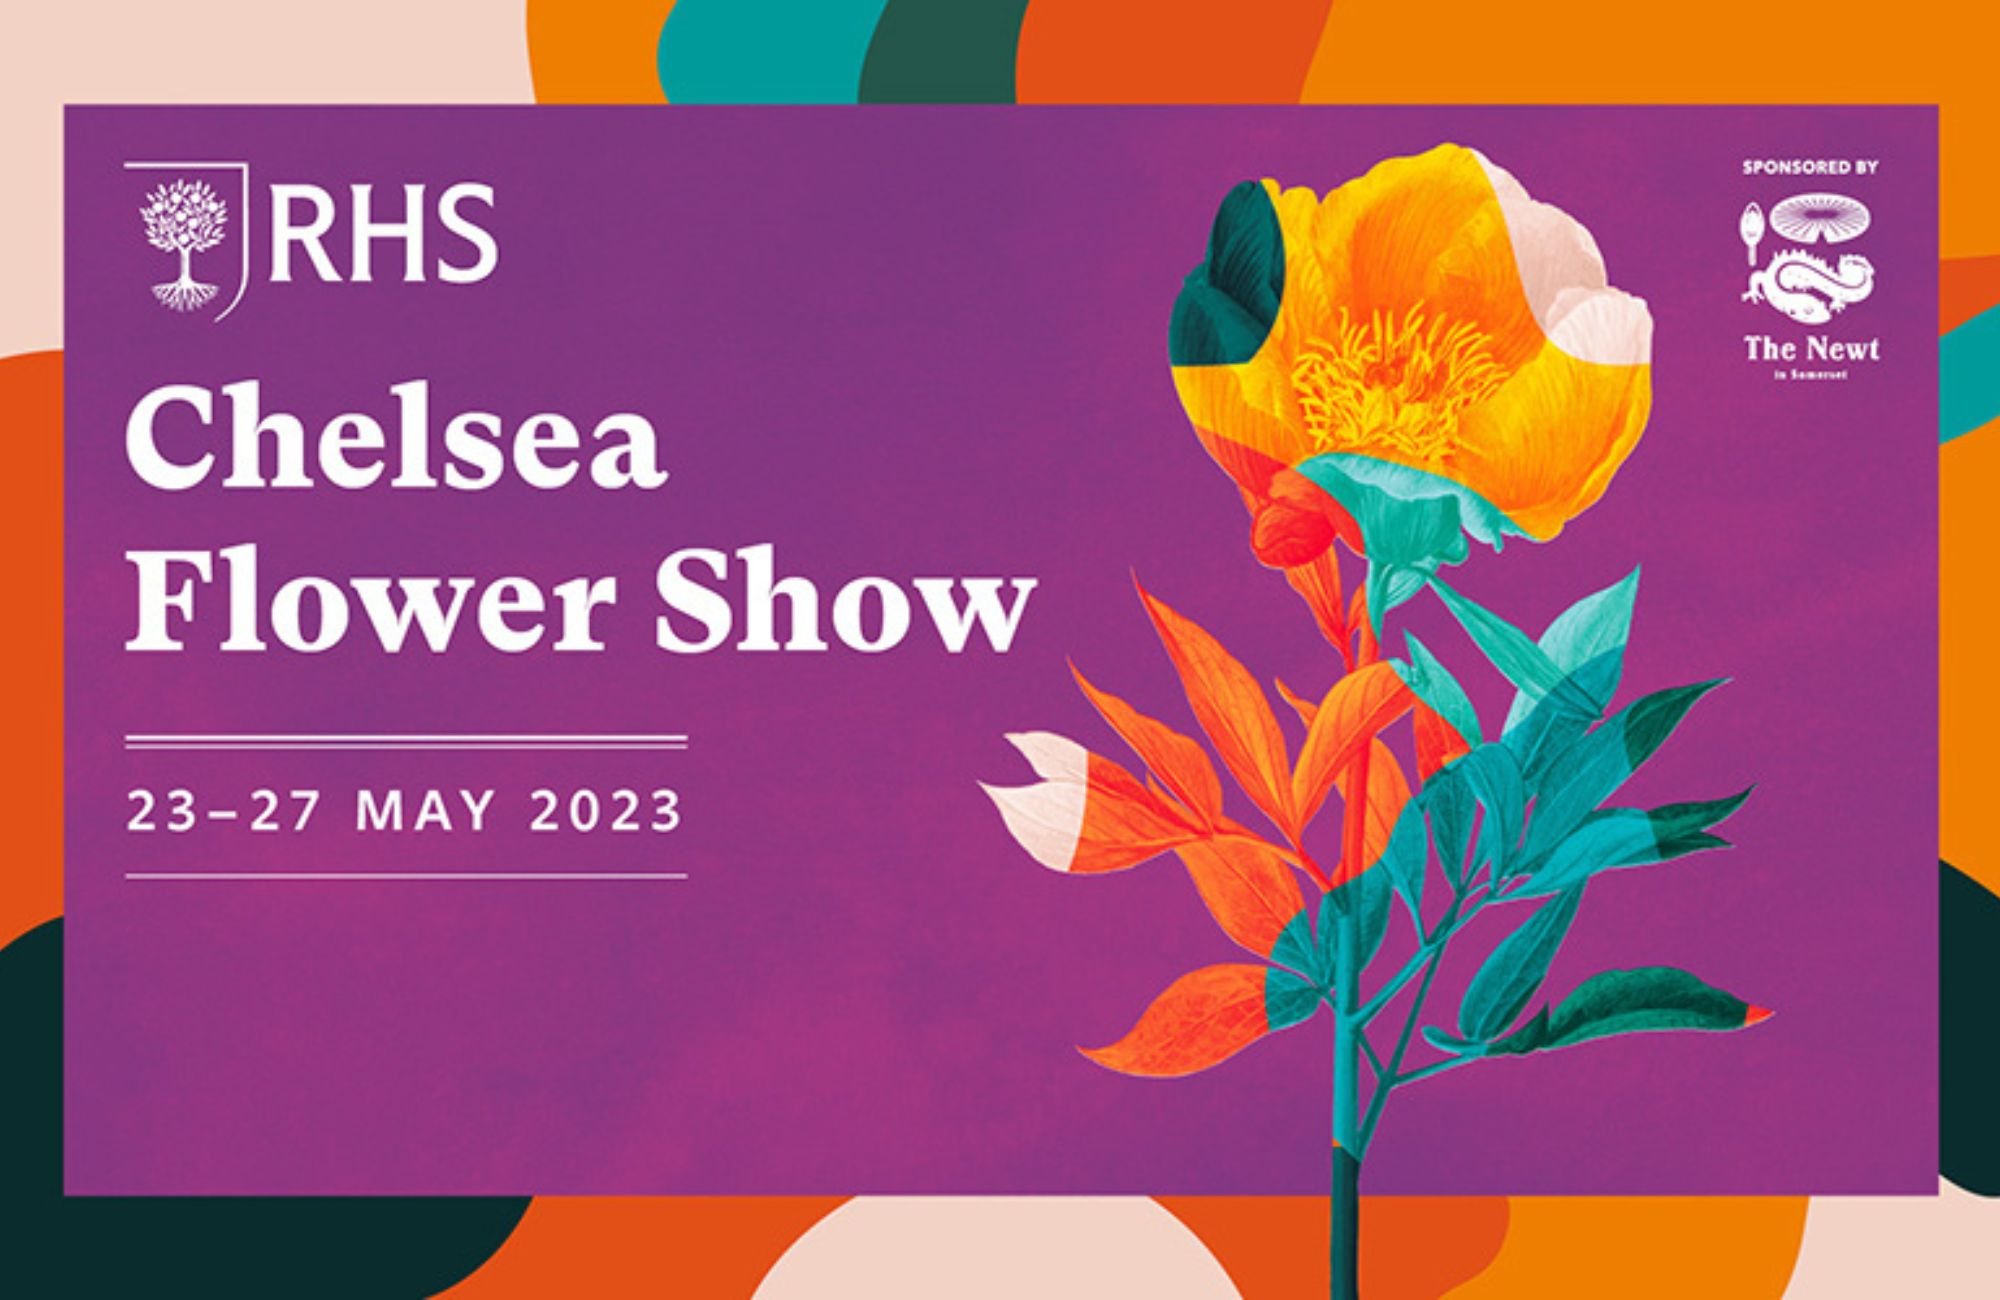 RHS Chelsea Flower Show 23 27 May 2023 What To Grow